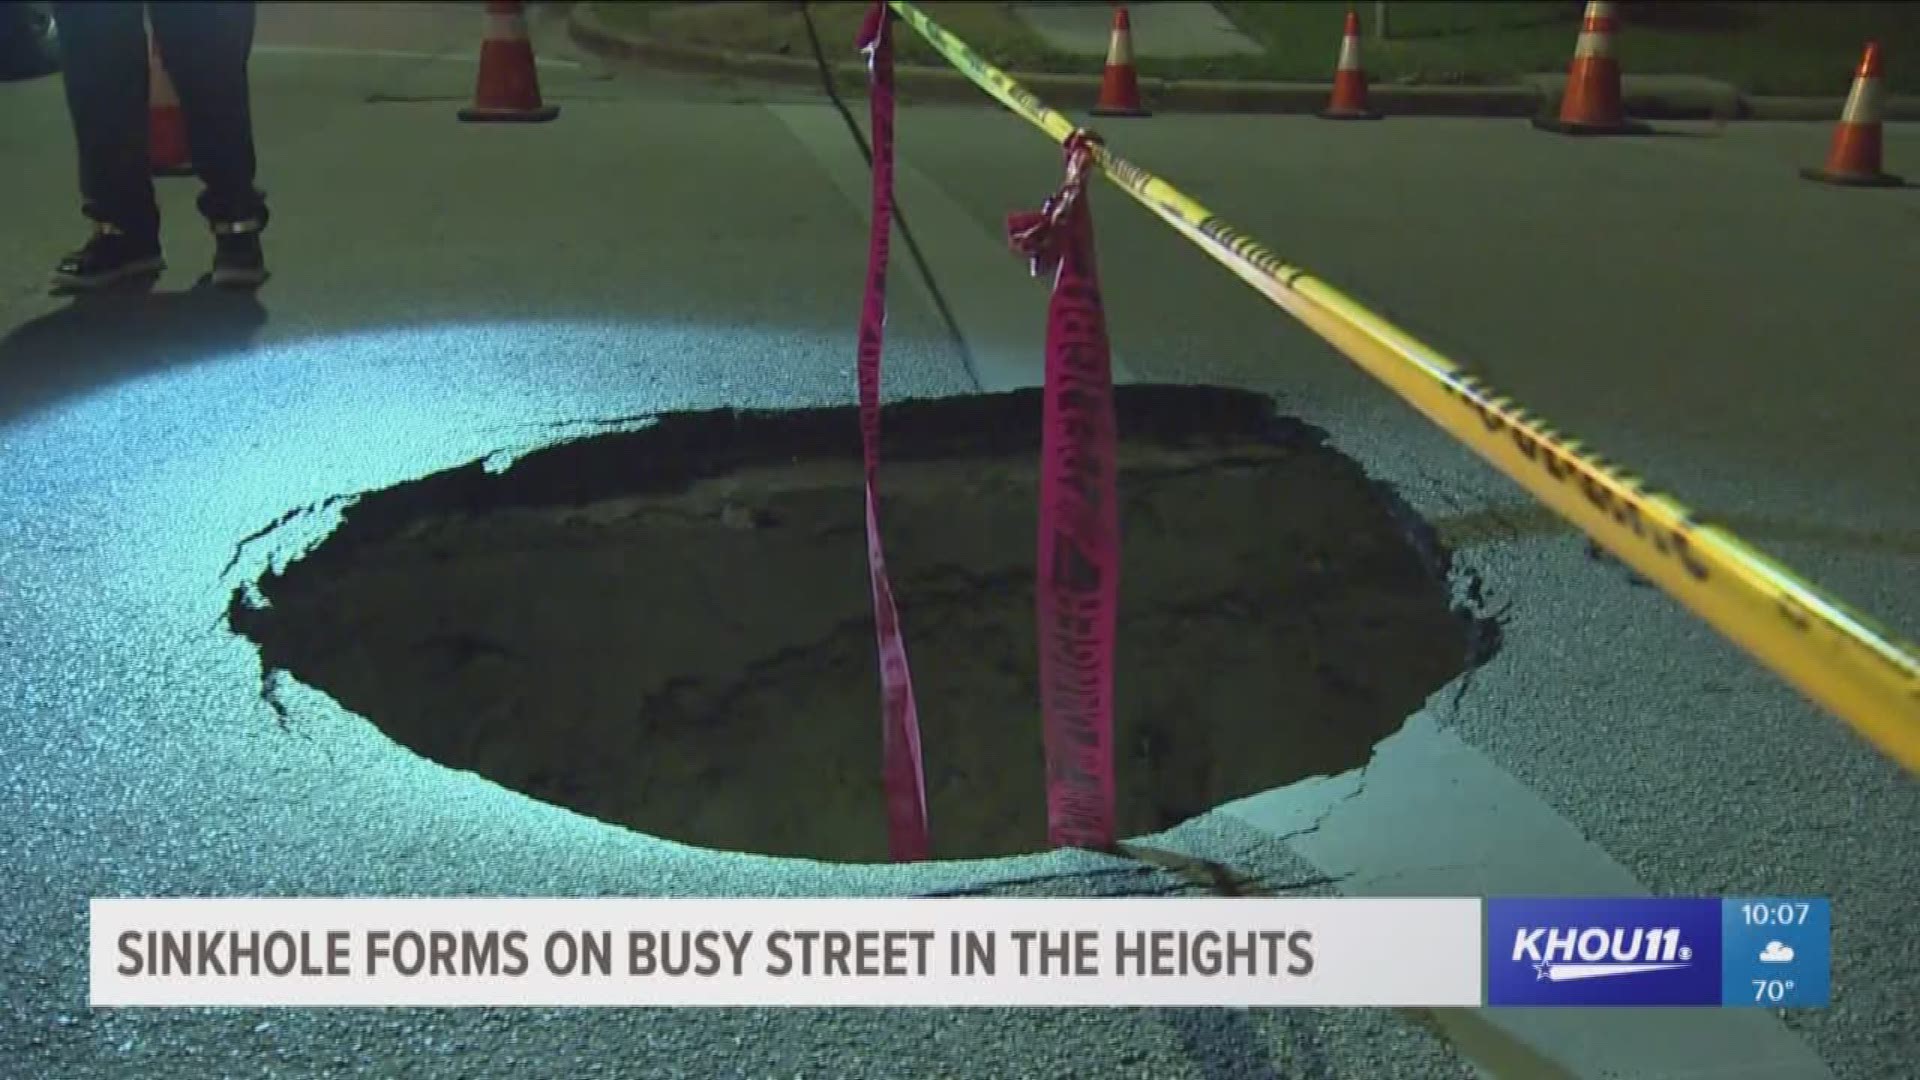 A sinkhole opened up around 4 p.m. on Rutland Street near W 16th Street. The intersection had to be closed down for safety. 